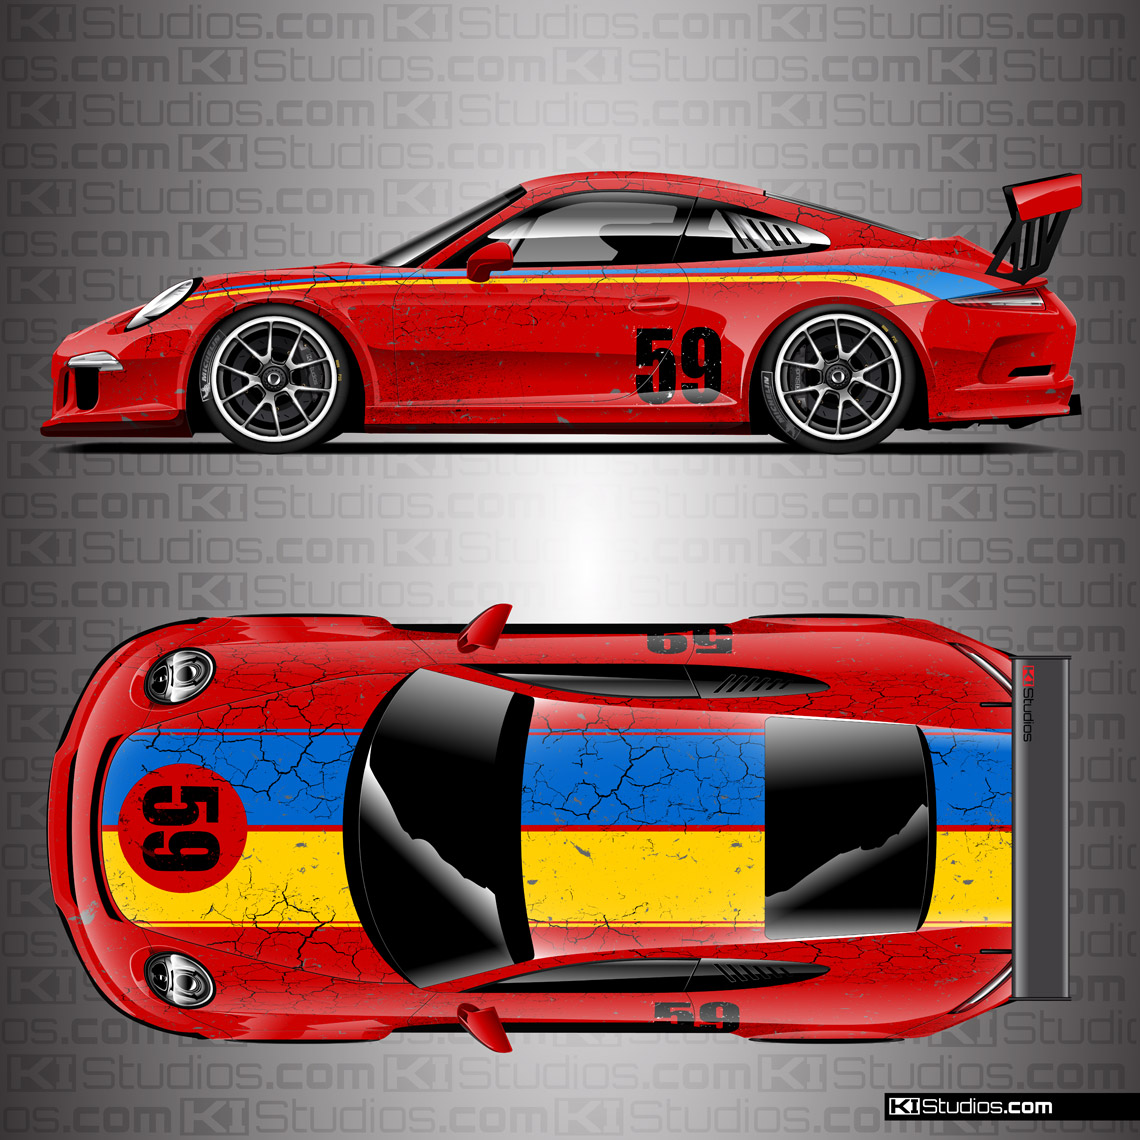 Porsche 991 GT3 Cup Car Brumos Distressed Livery by KI Studios - Red, Blue, Yellow